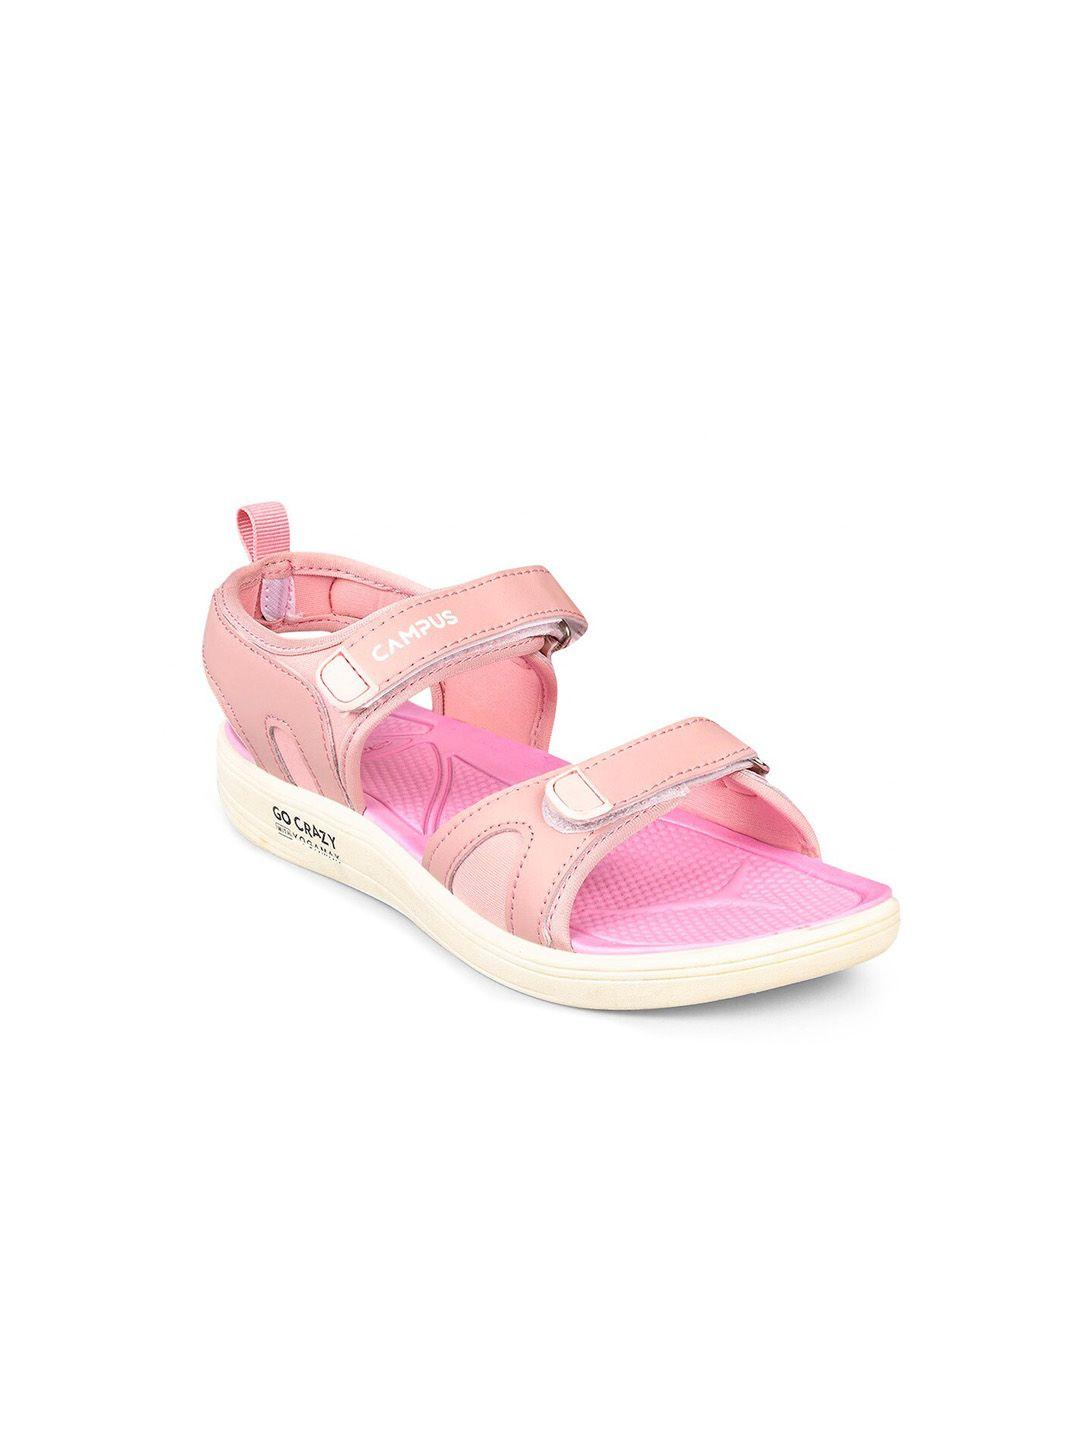 campus women pink solid sports sandals